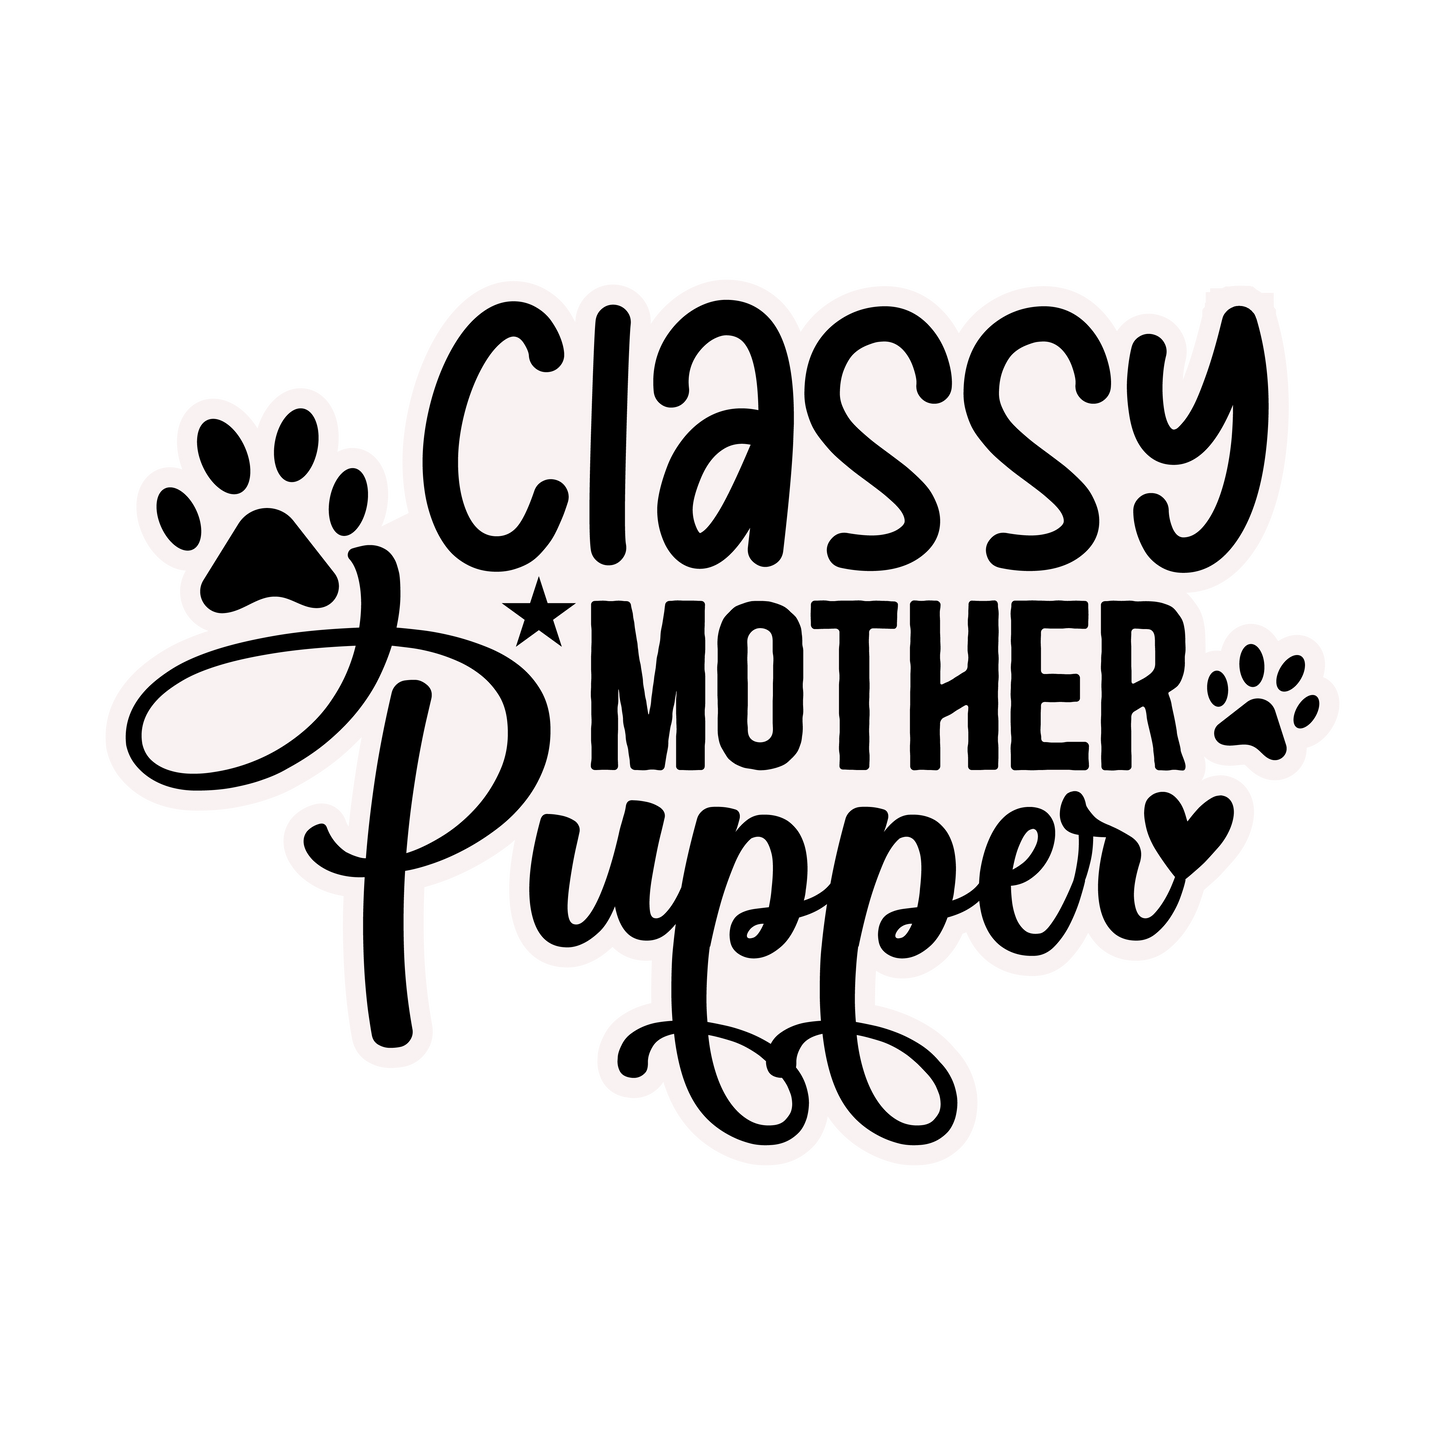 Stickers - Classy Mother Pupper Sticker, Dog Lovers' Stickers